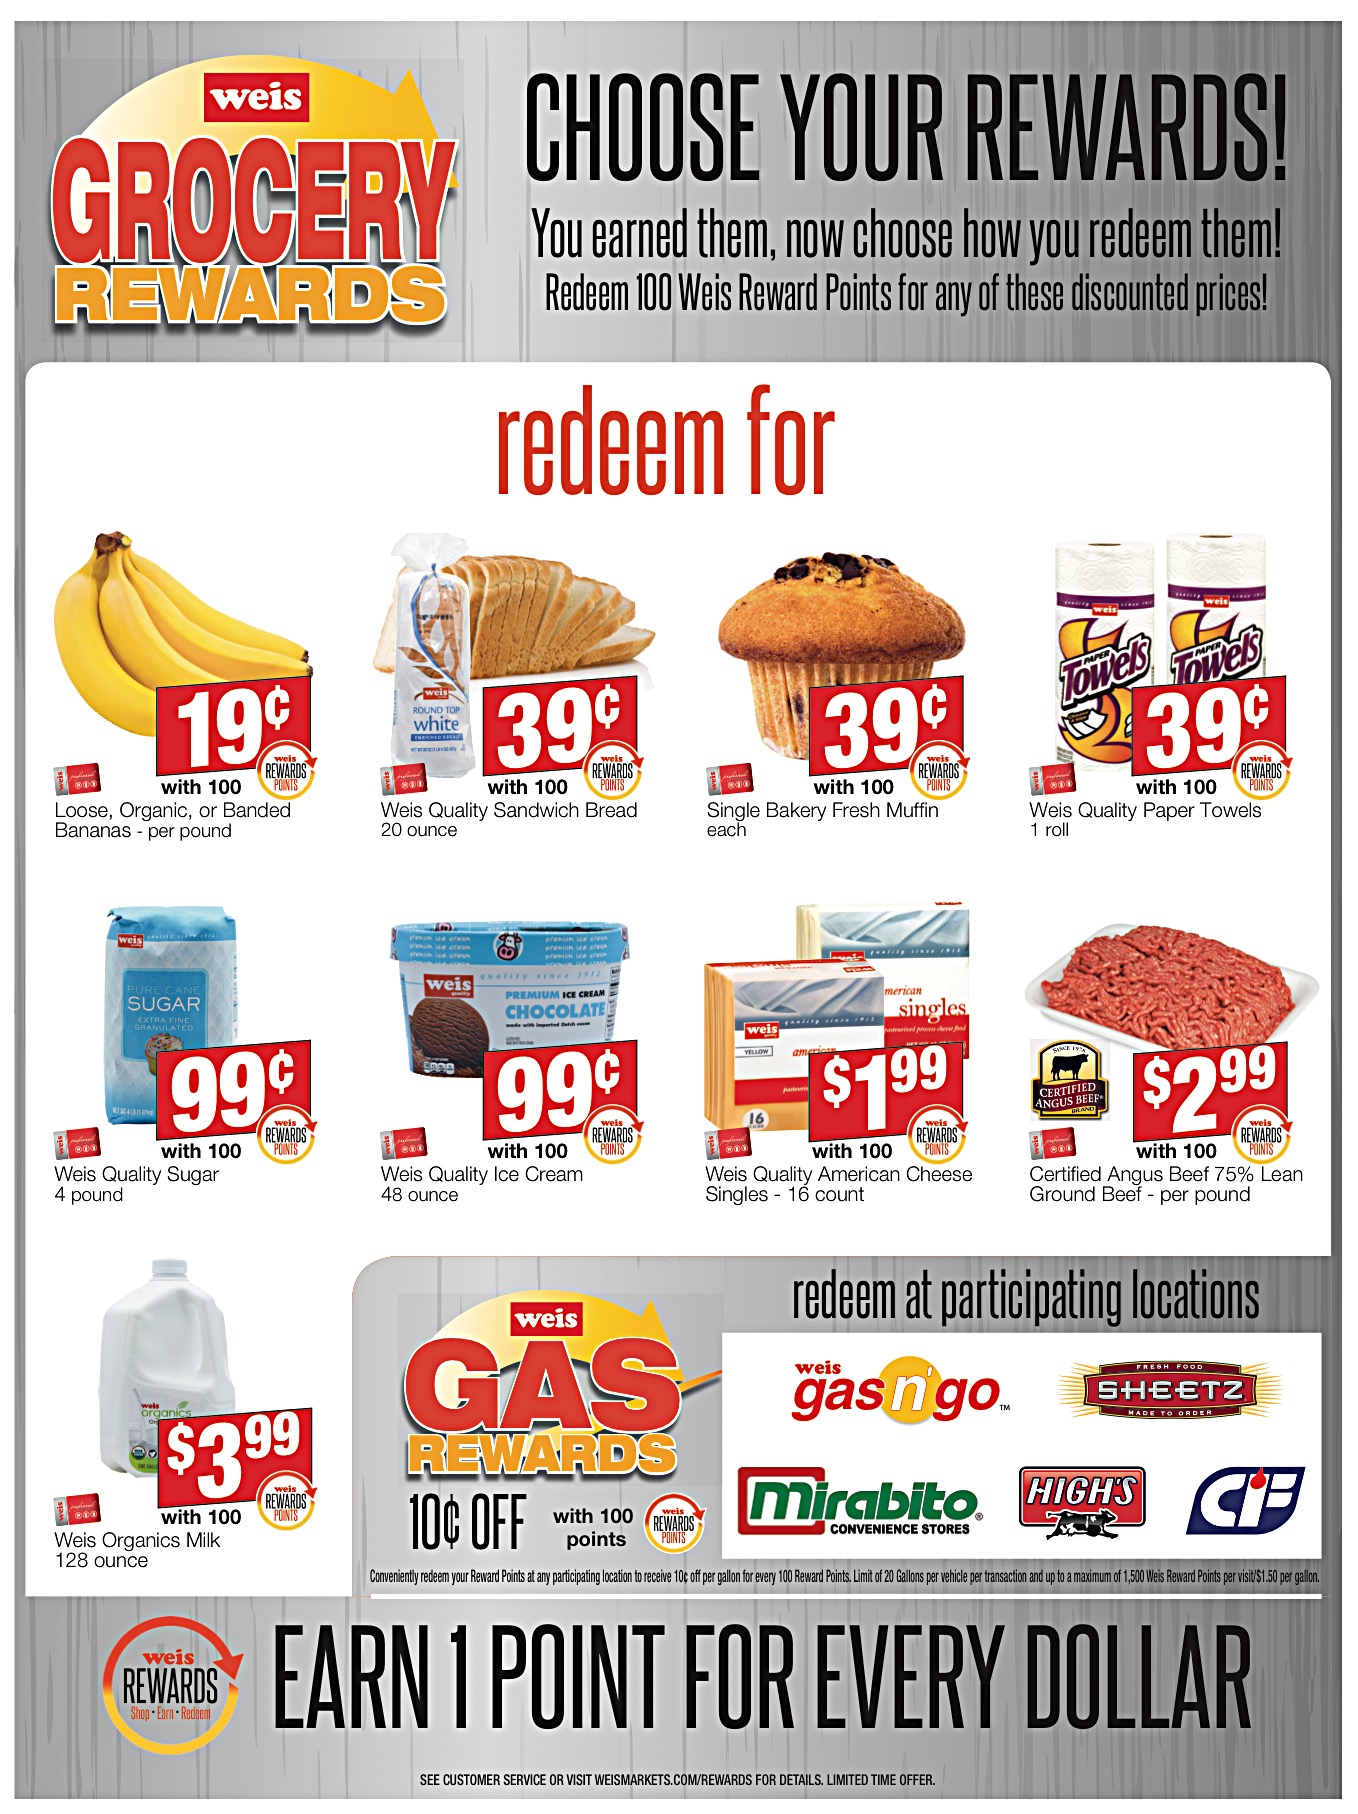 Gas Rewards Save 0 10 Per Gallon For Every 100 Weis Reward Points You Redeem Although Can Accrue An Unlimited Amount Of